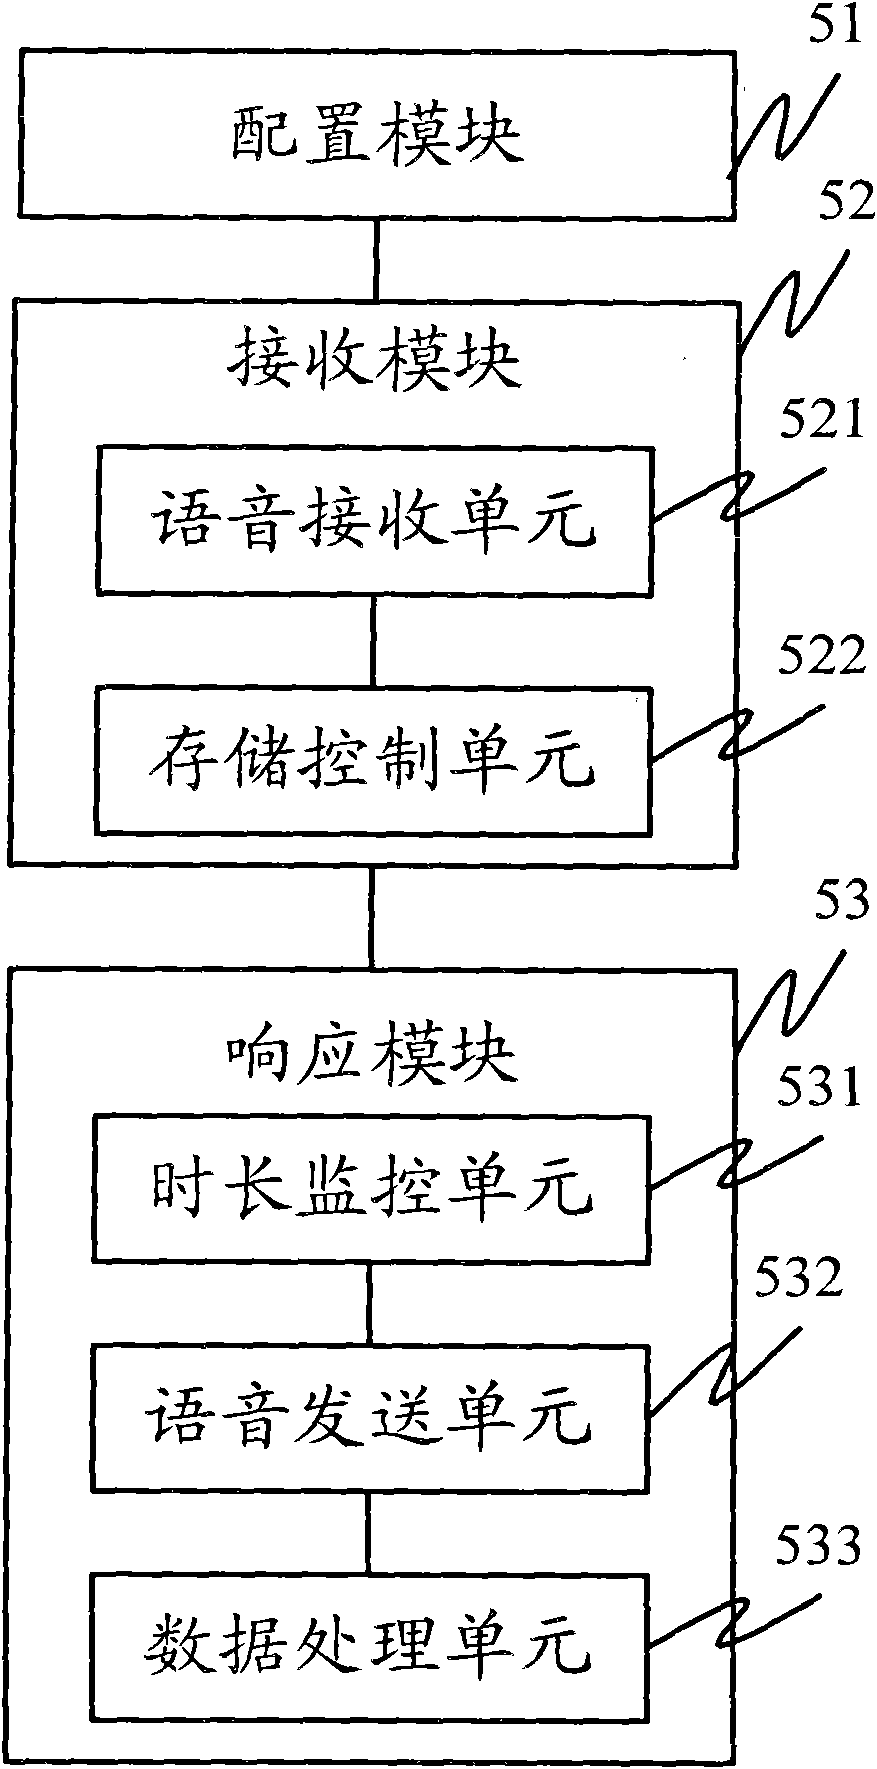 Voice monitoring method and device